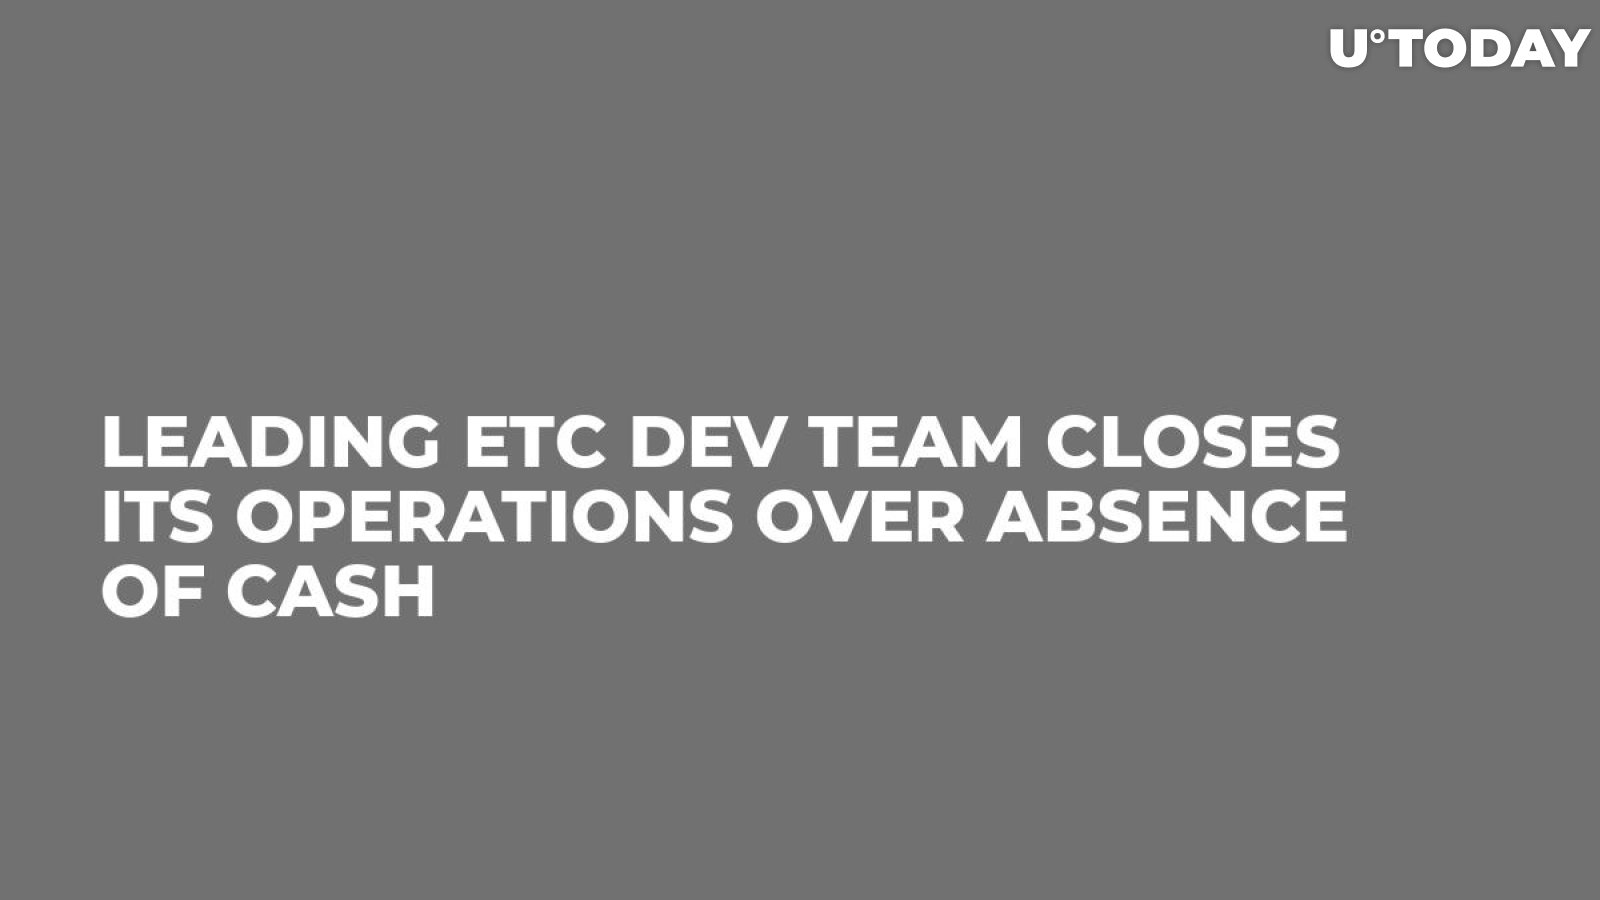 Leading ETC Dev Team Closes Its Operations Over Absence of Cash